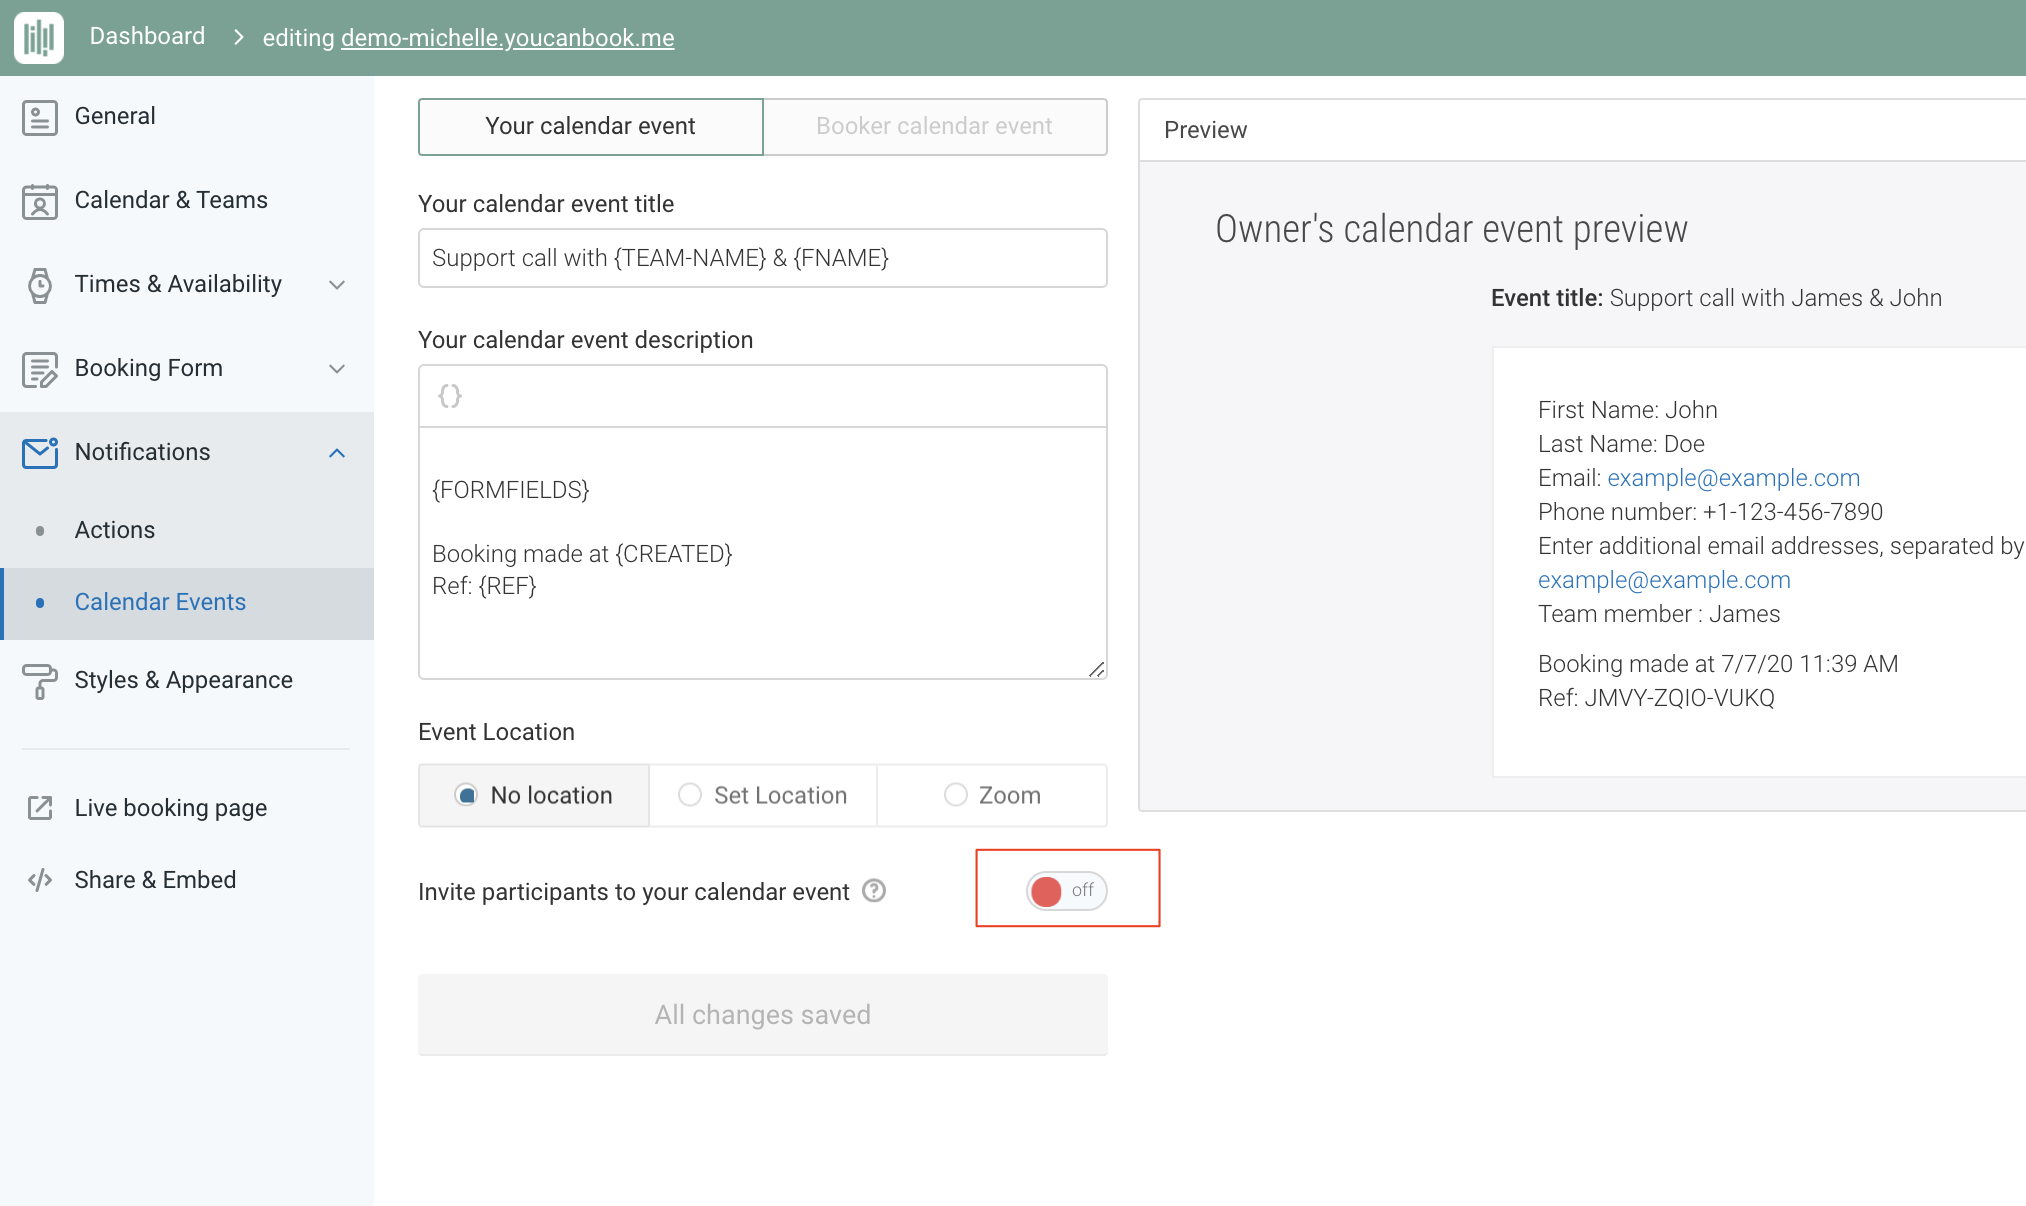 Managing Calendar Invitations  Youcanbook Support throughout Calendar Invitation Your Response To The Invitation Cannot Be Sent